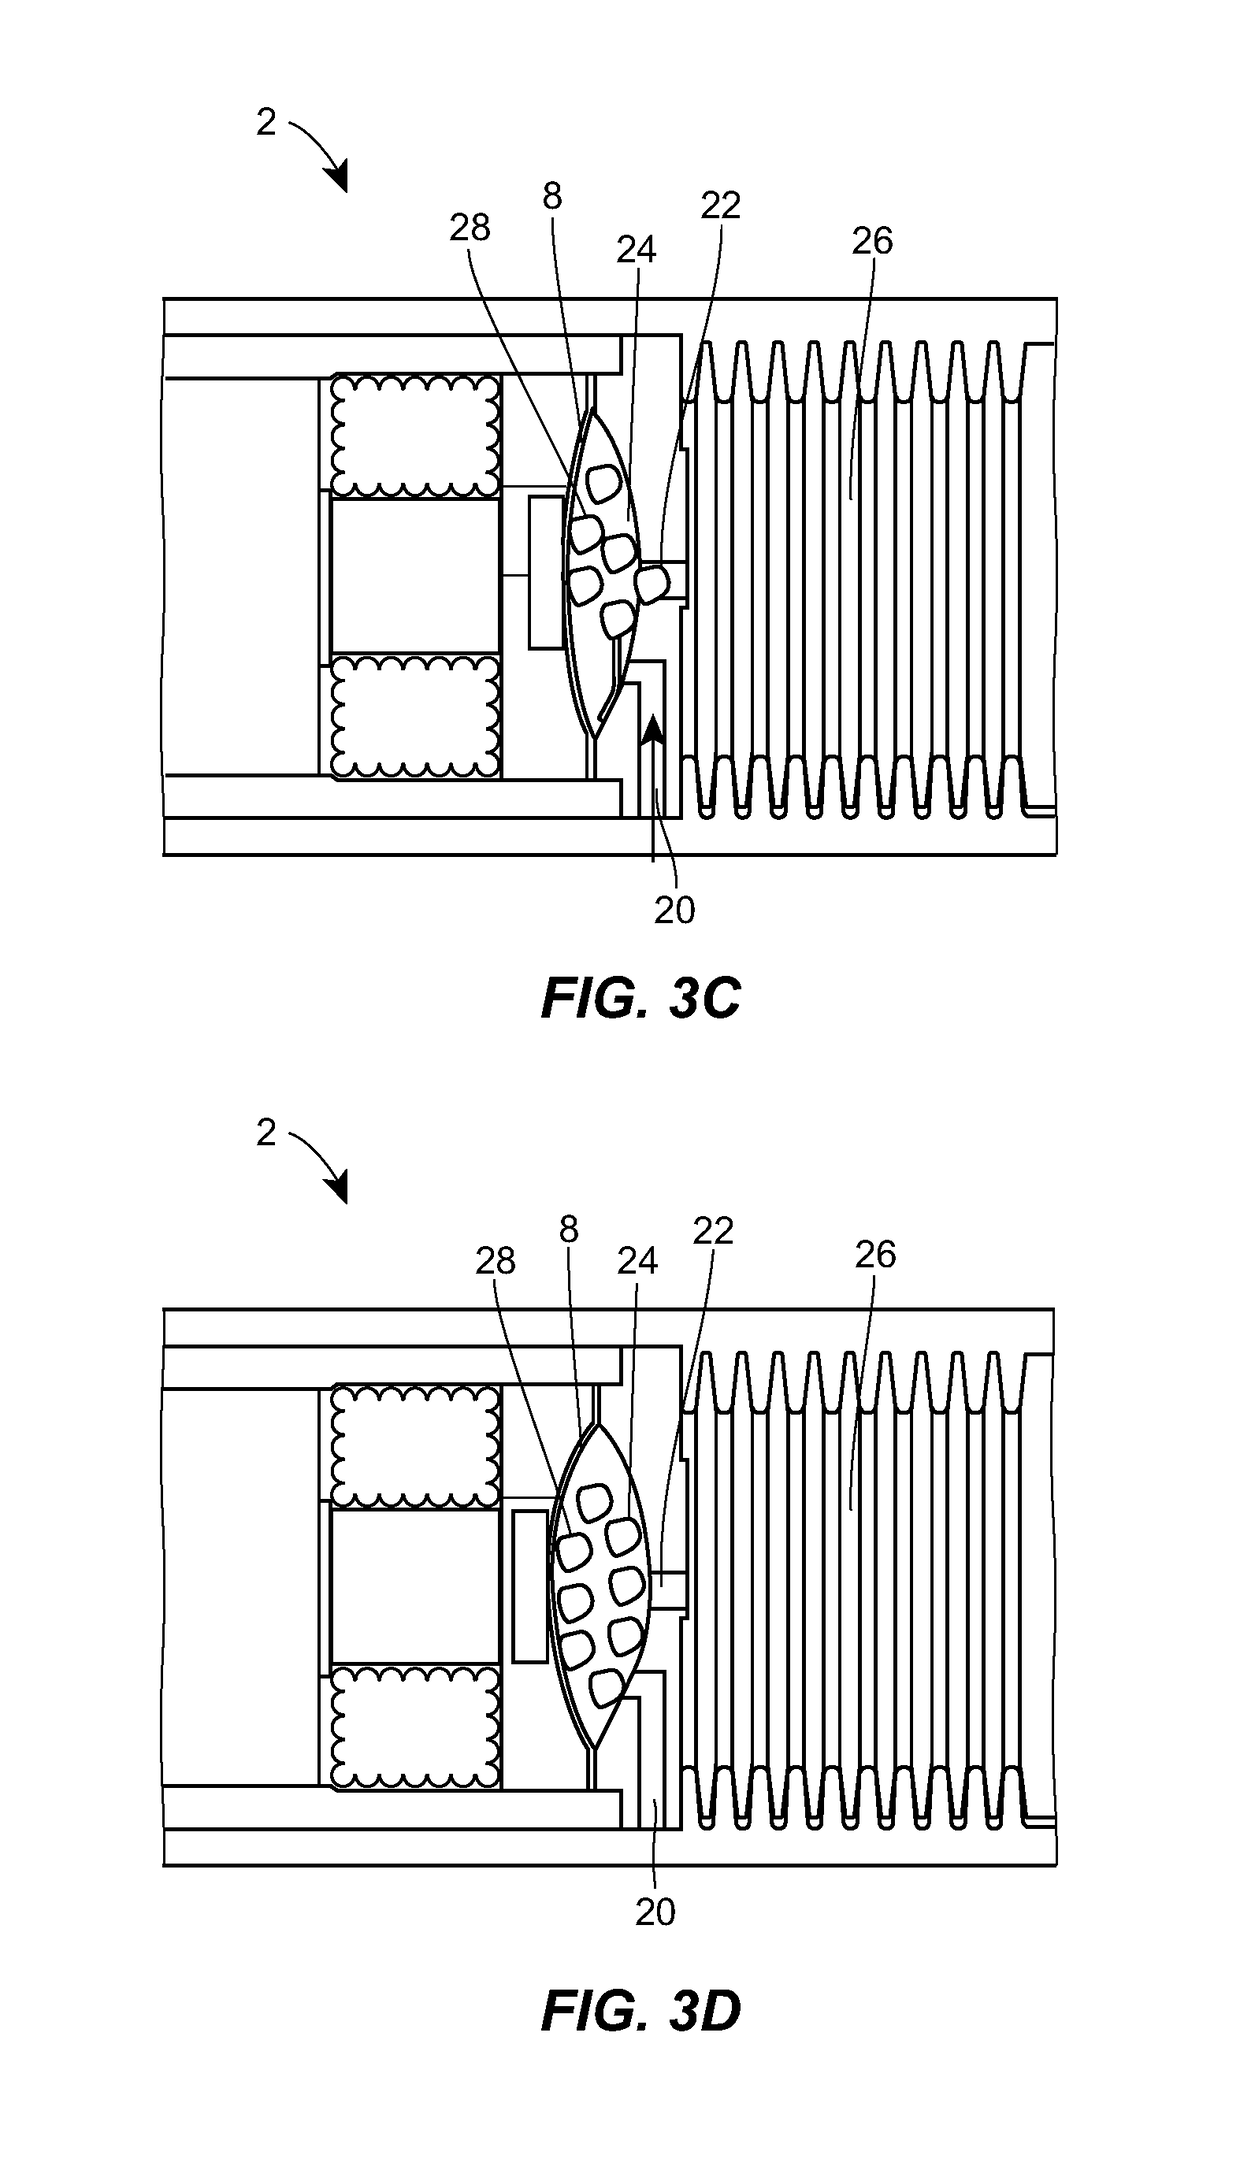 Ingestible Capsule Device for Collecting Fluid Aspirates